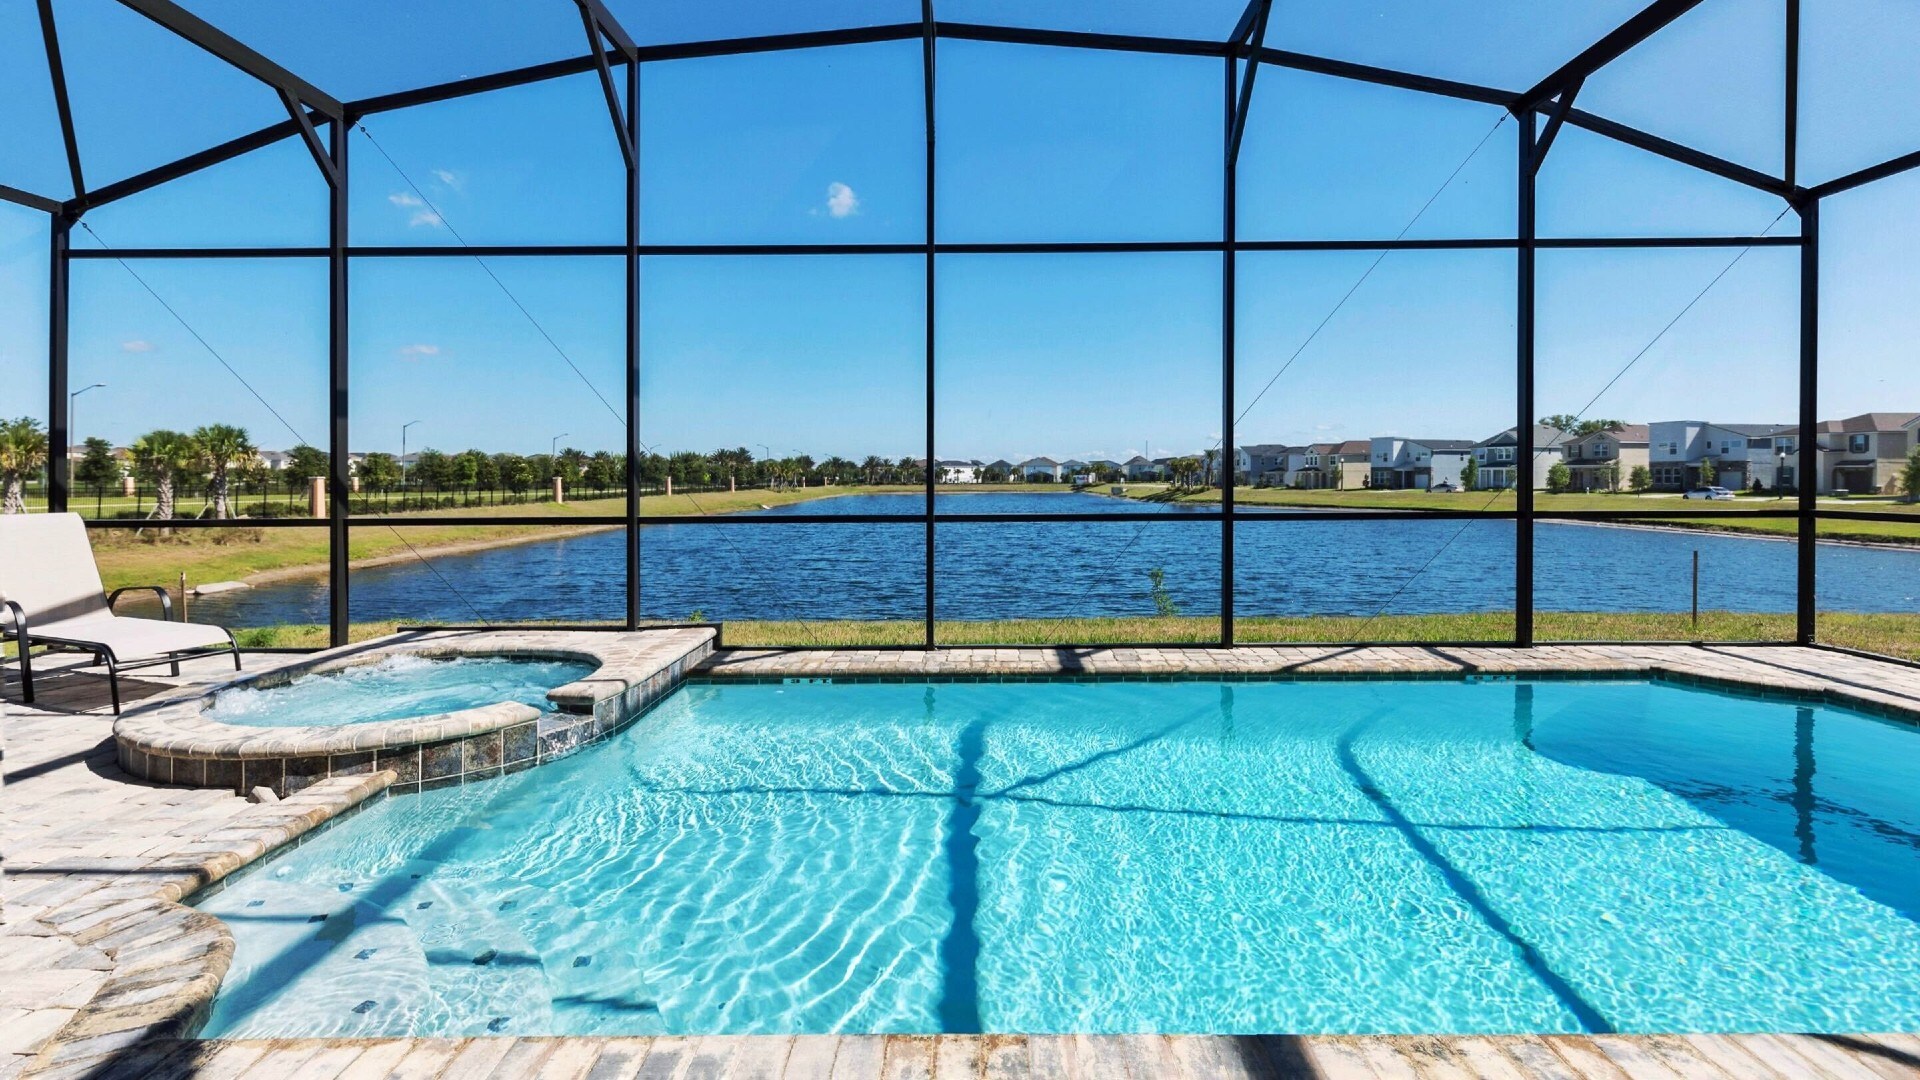 Luxuriate in the spa with views out onto the lake